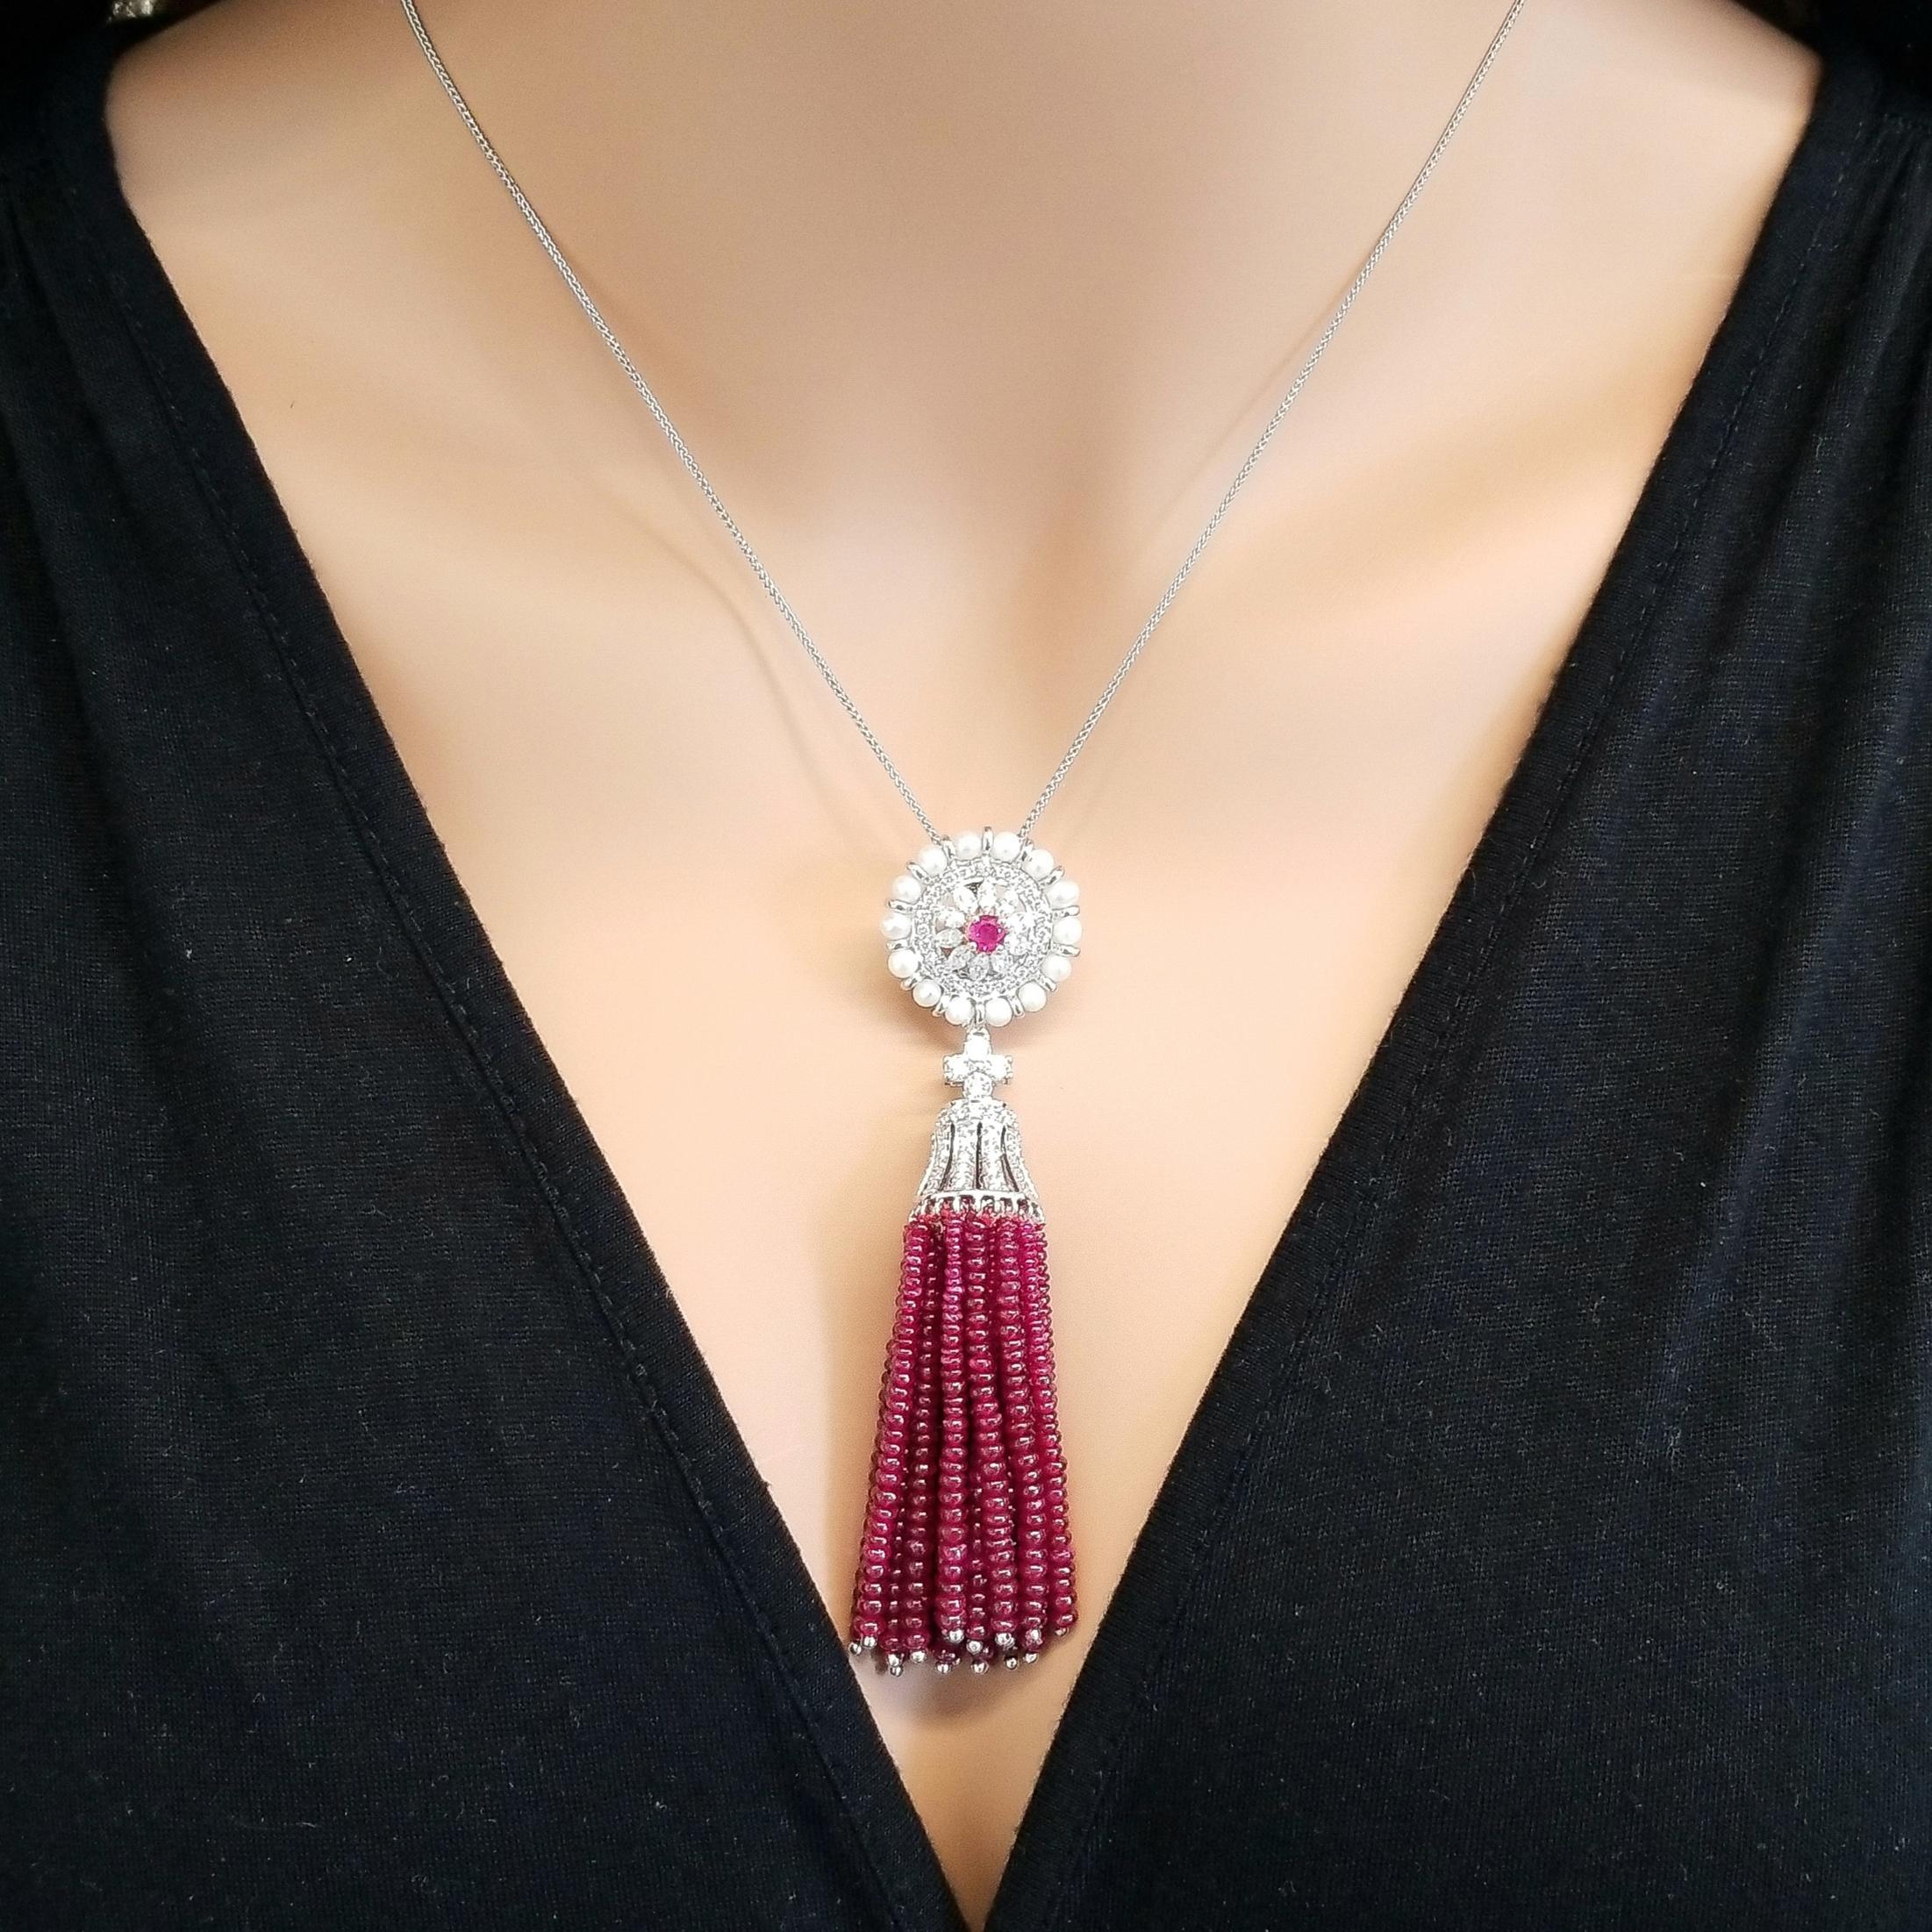 This pendant drips rubies. The ruby gem source is Thailand. 74.87 carats of ruby beads tassle is significant. Its blood red color is sought after and is perfectly, precisely matched. A total of 2.03 carats of sparkling round brilliant cut diamonds